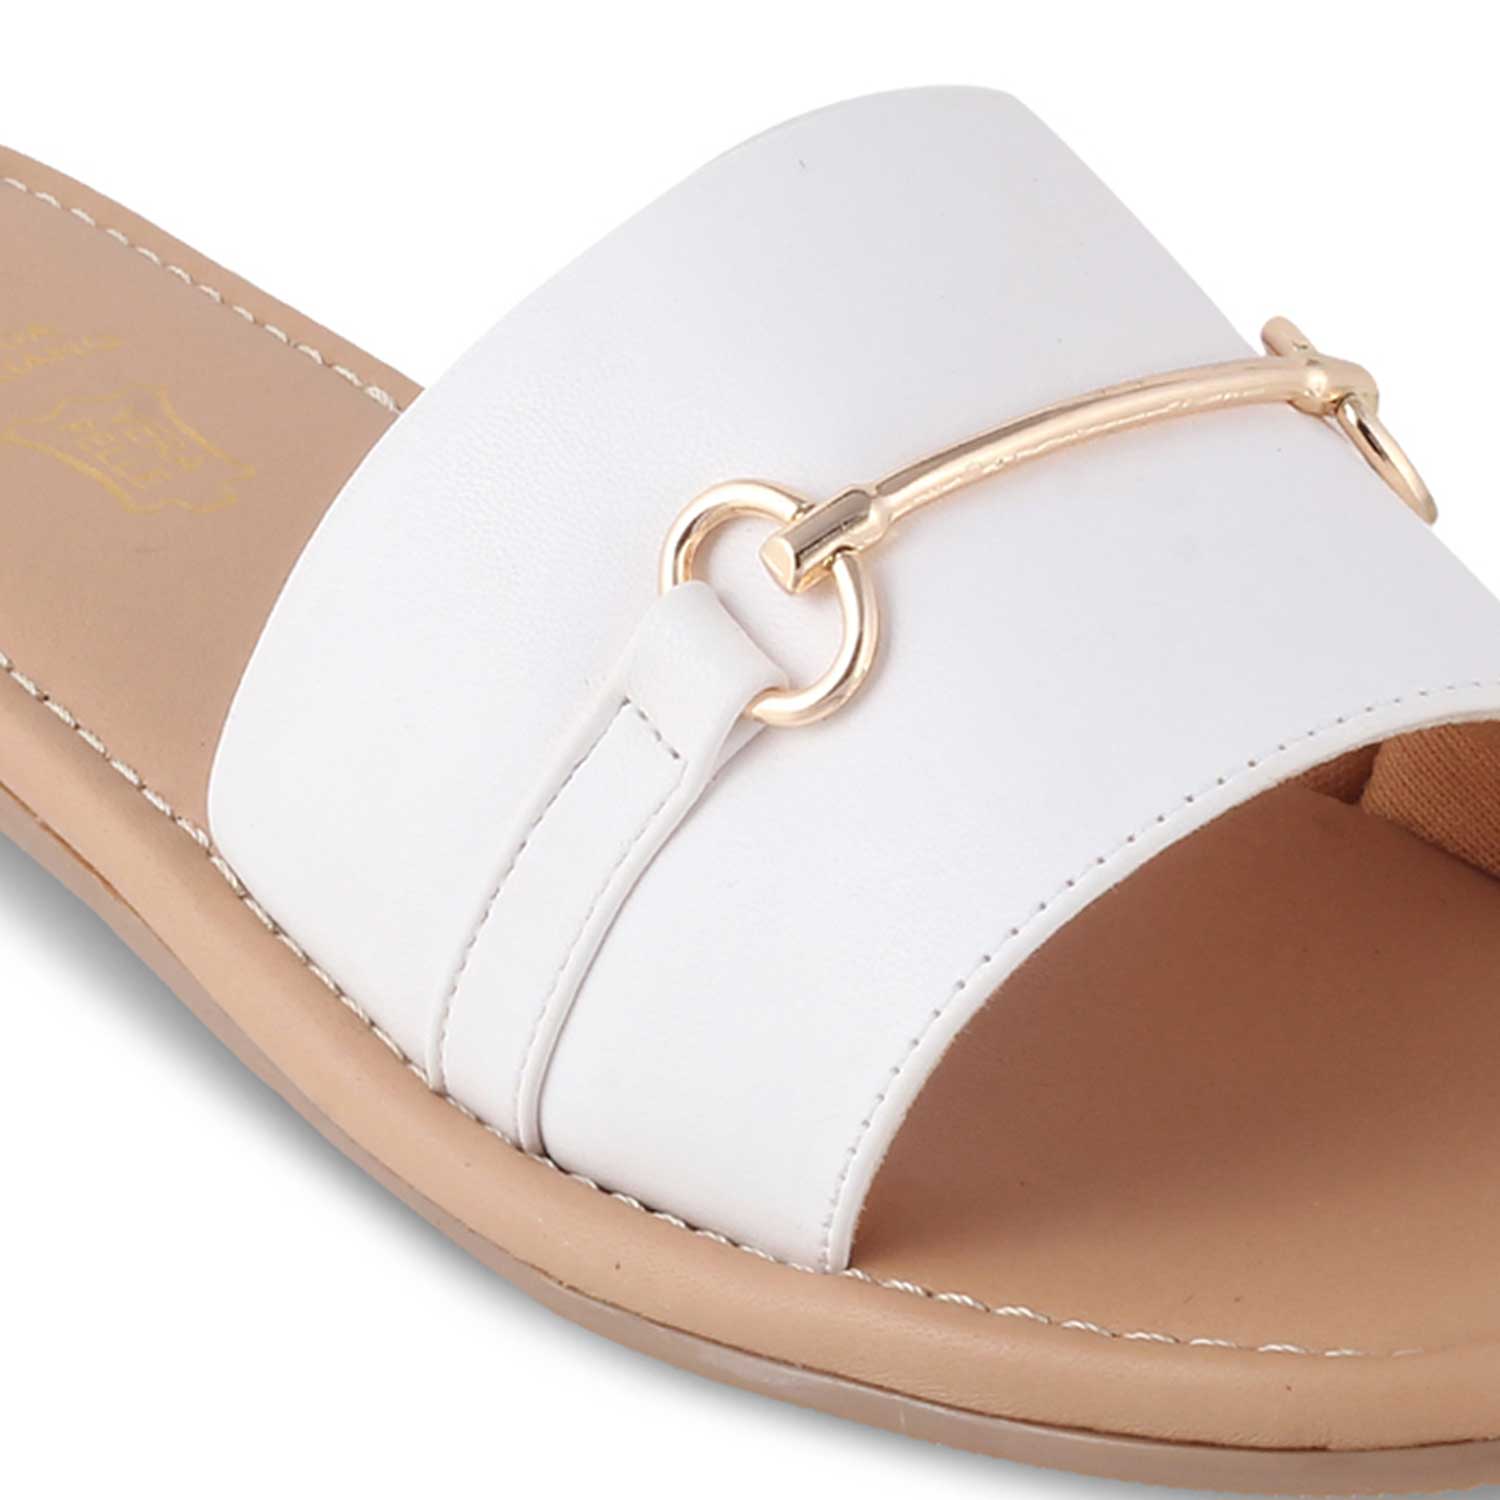 The Cafi White Women's Casual Flats Tresmode